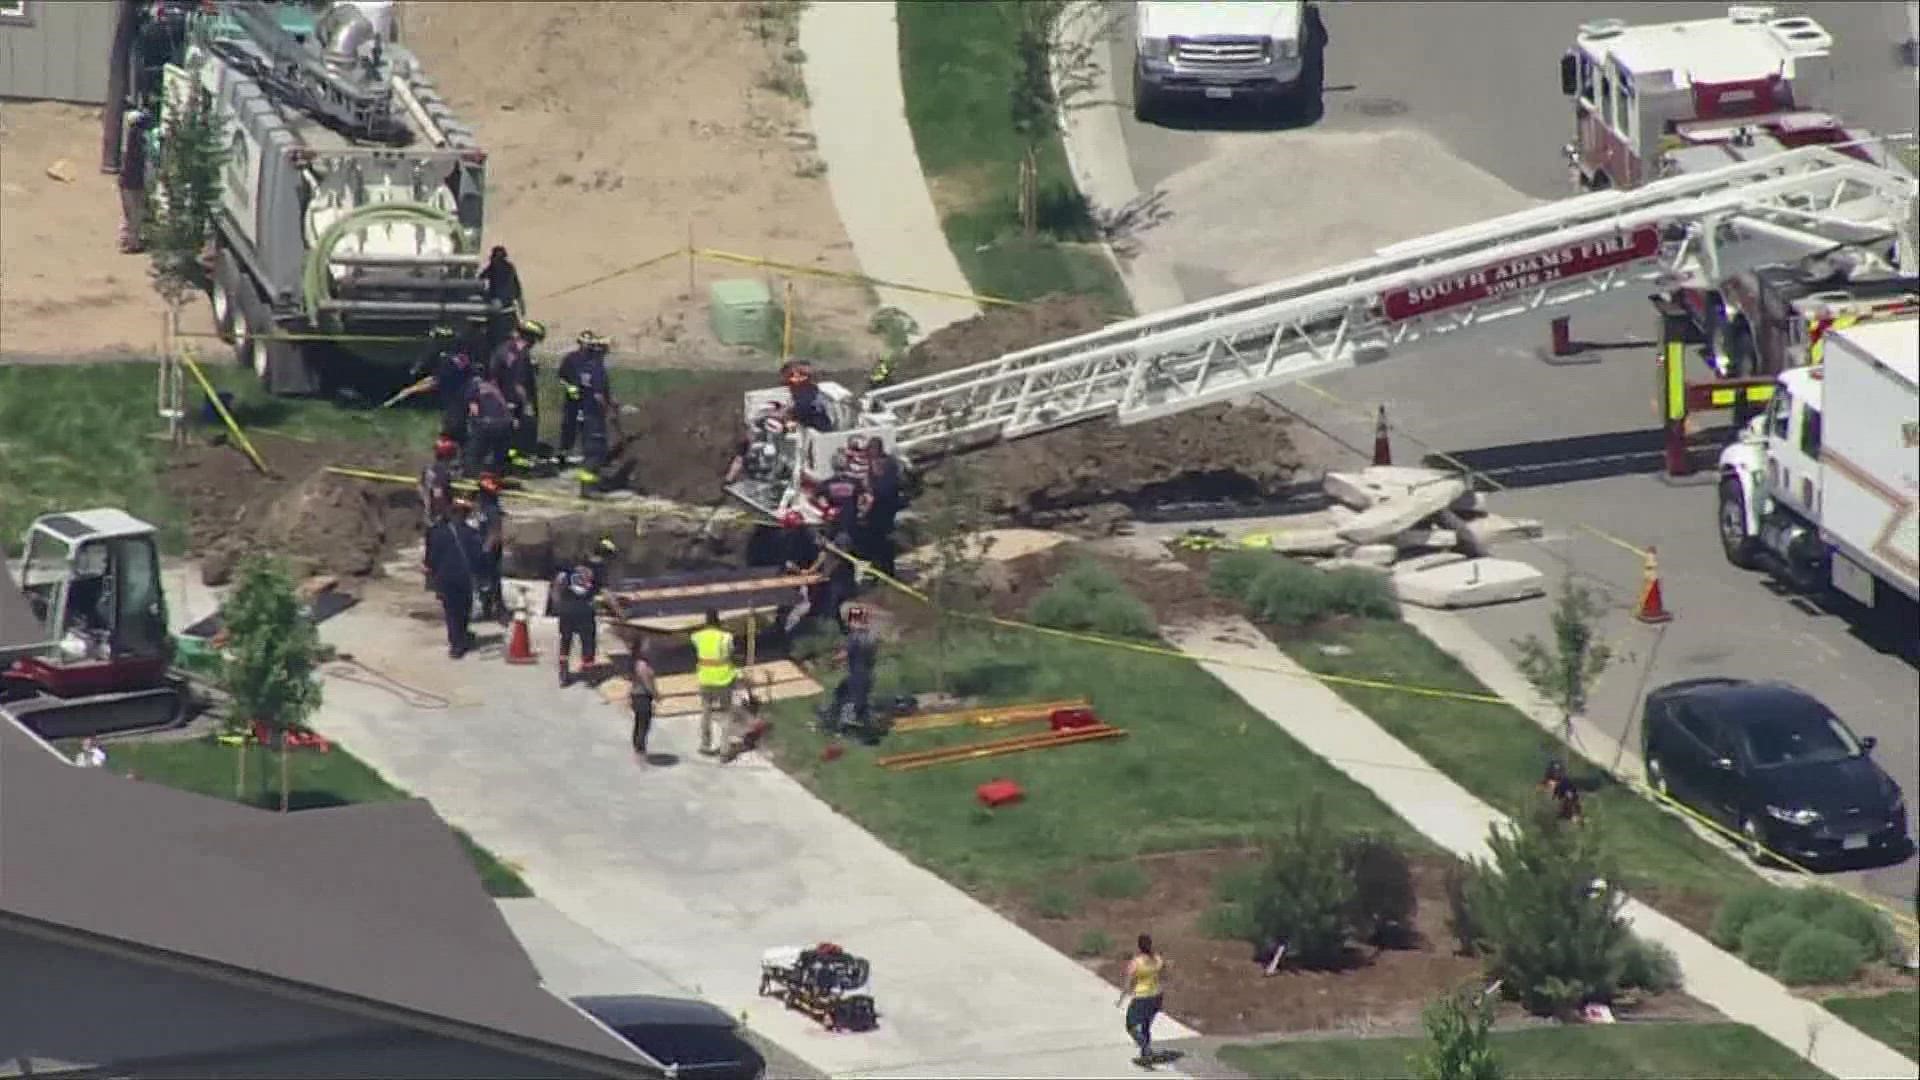 Crews spent hours performing a trench rescue operation before finding the man.